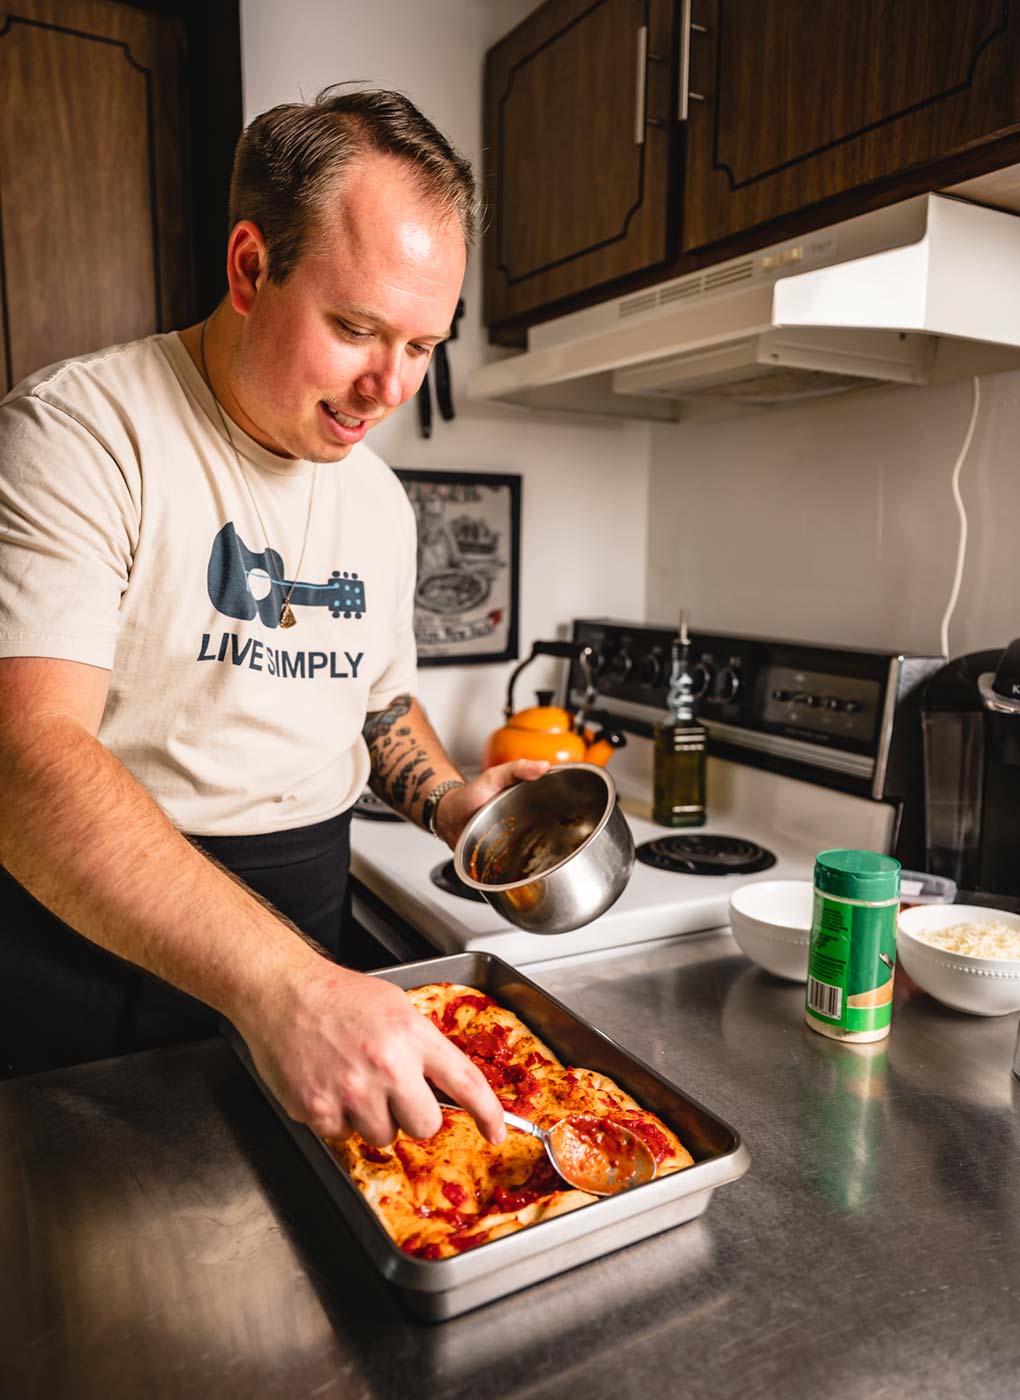 Spencer has been turning out pizzas one at a time from his home kitchen to meet the growing demand.